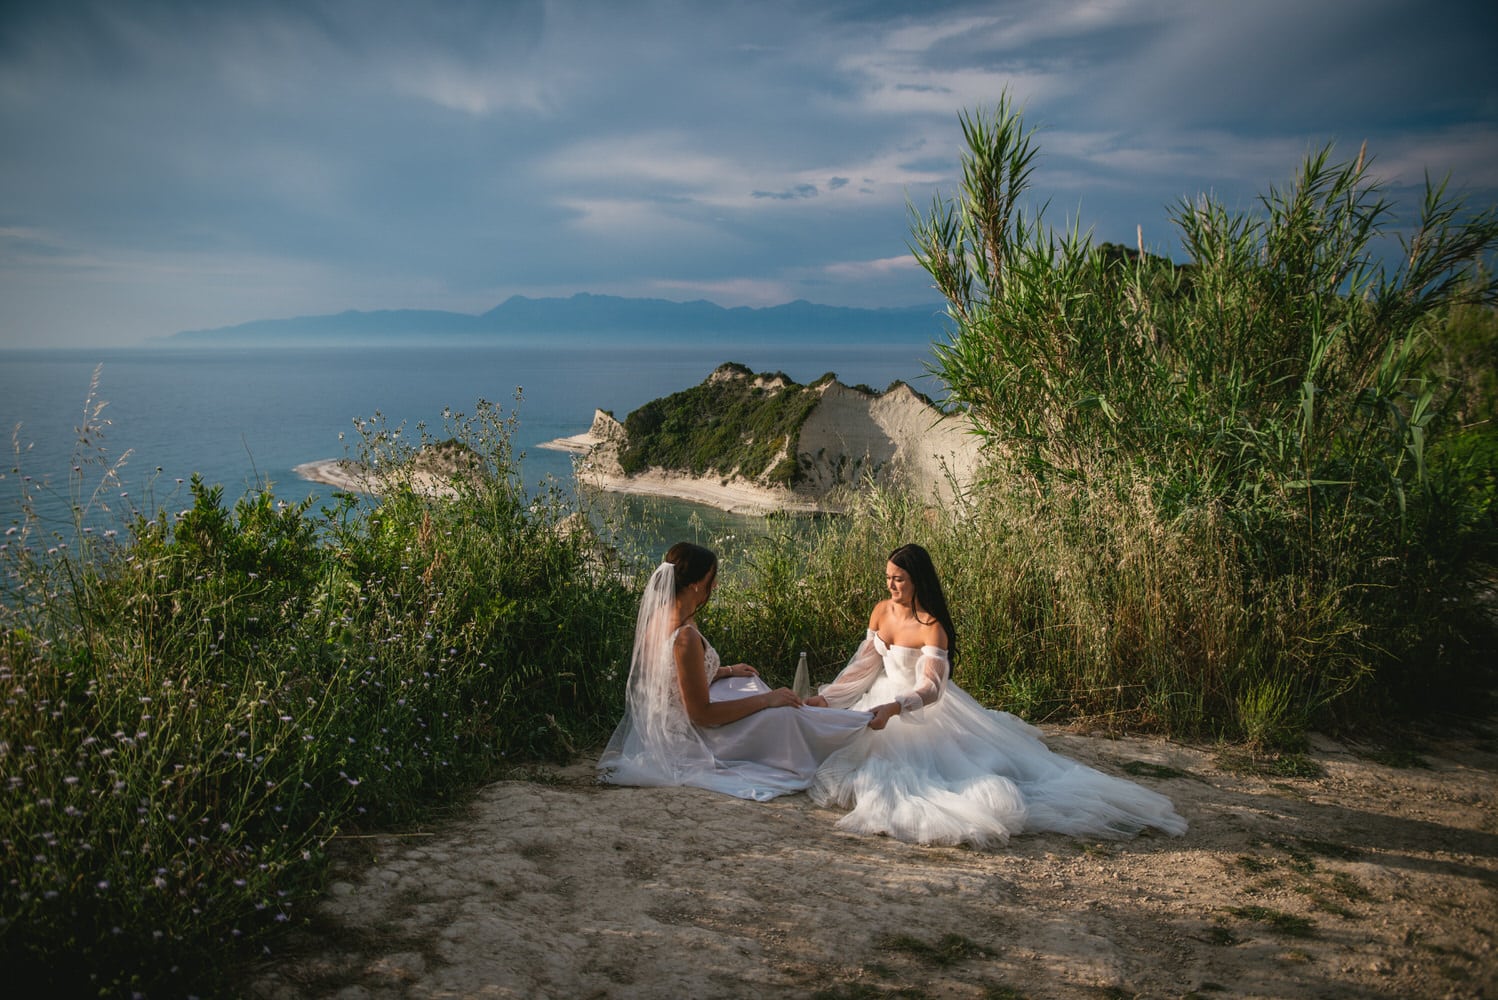 A breathtaking view: Brides embrace against a stunning clifftop seascape during their Corfu elopement.